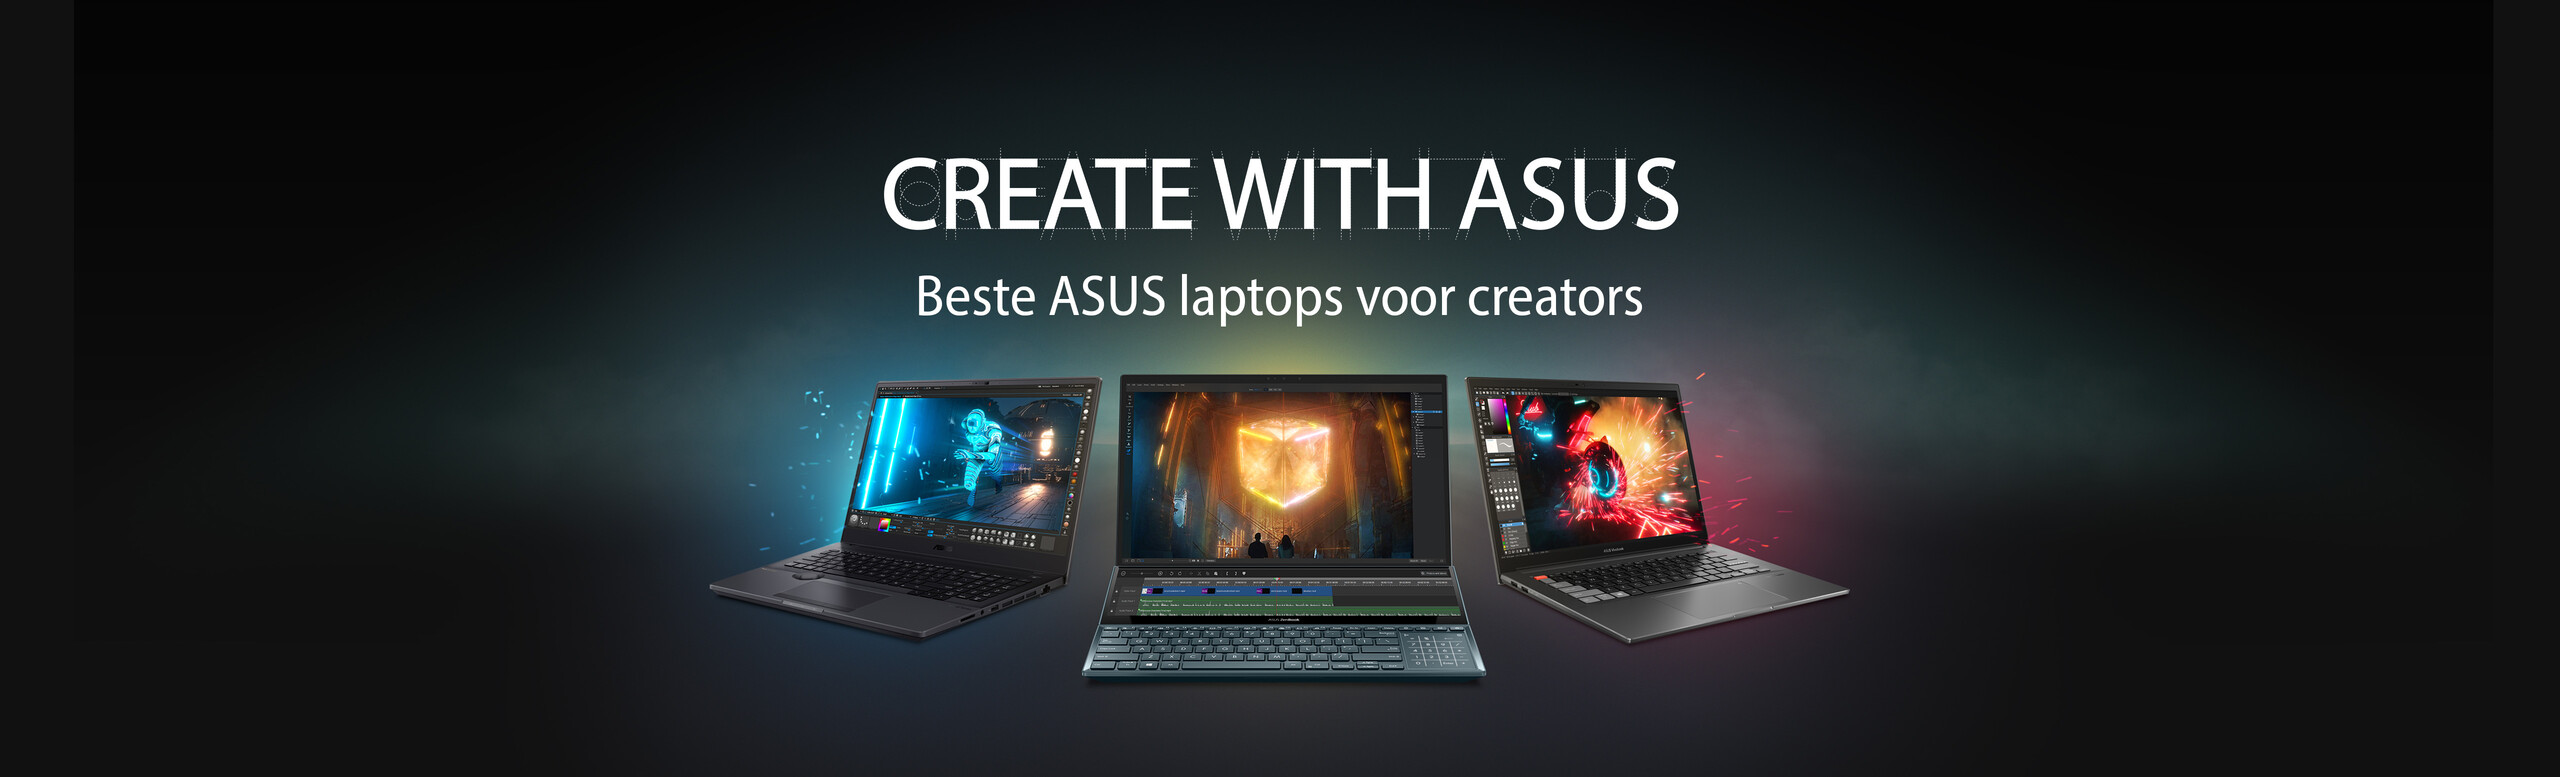 Create with asus